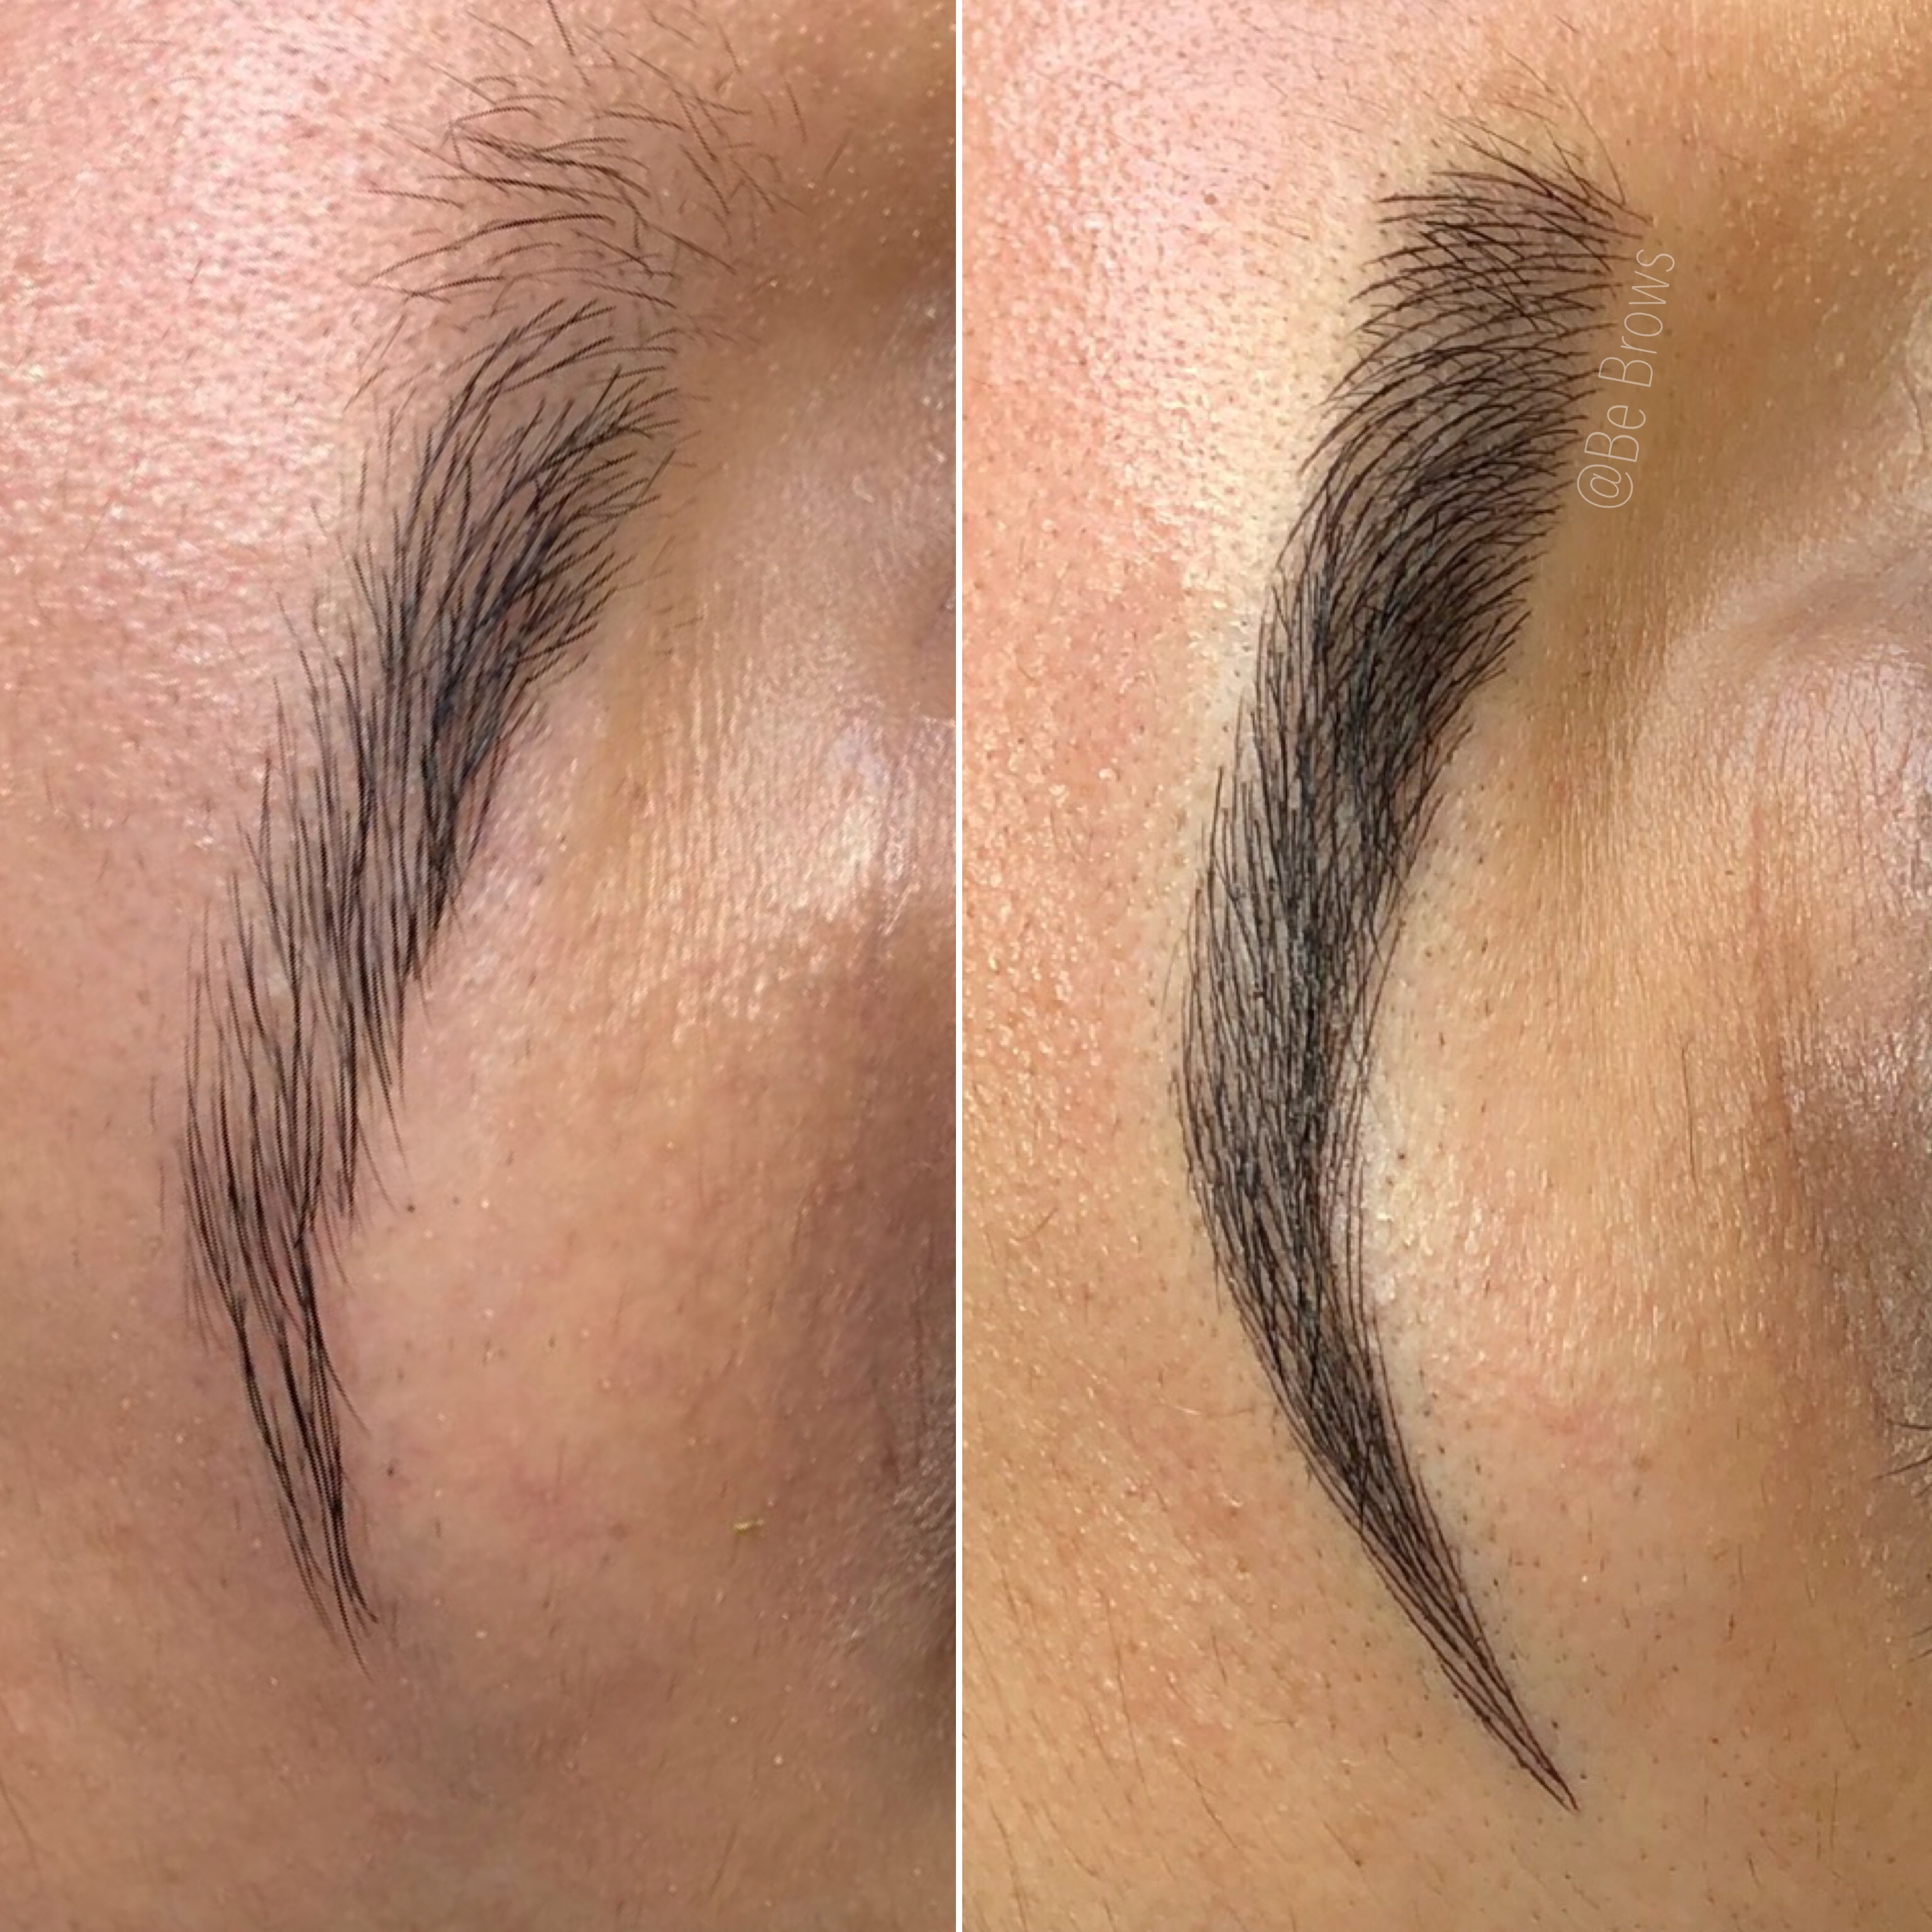 Touch up (8 weeks  -6 months after your previous visit)